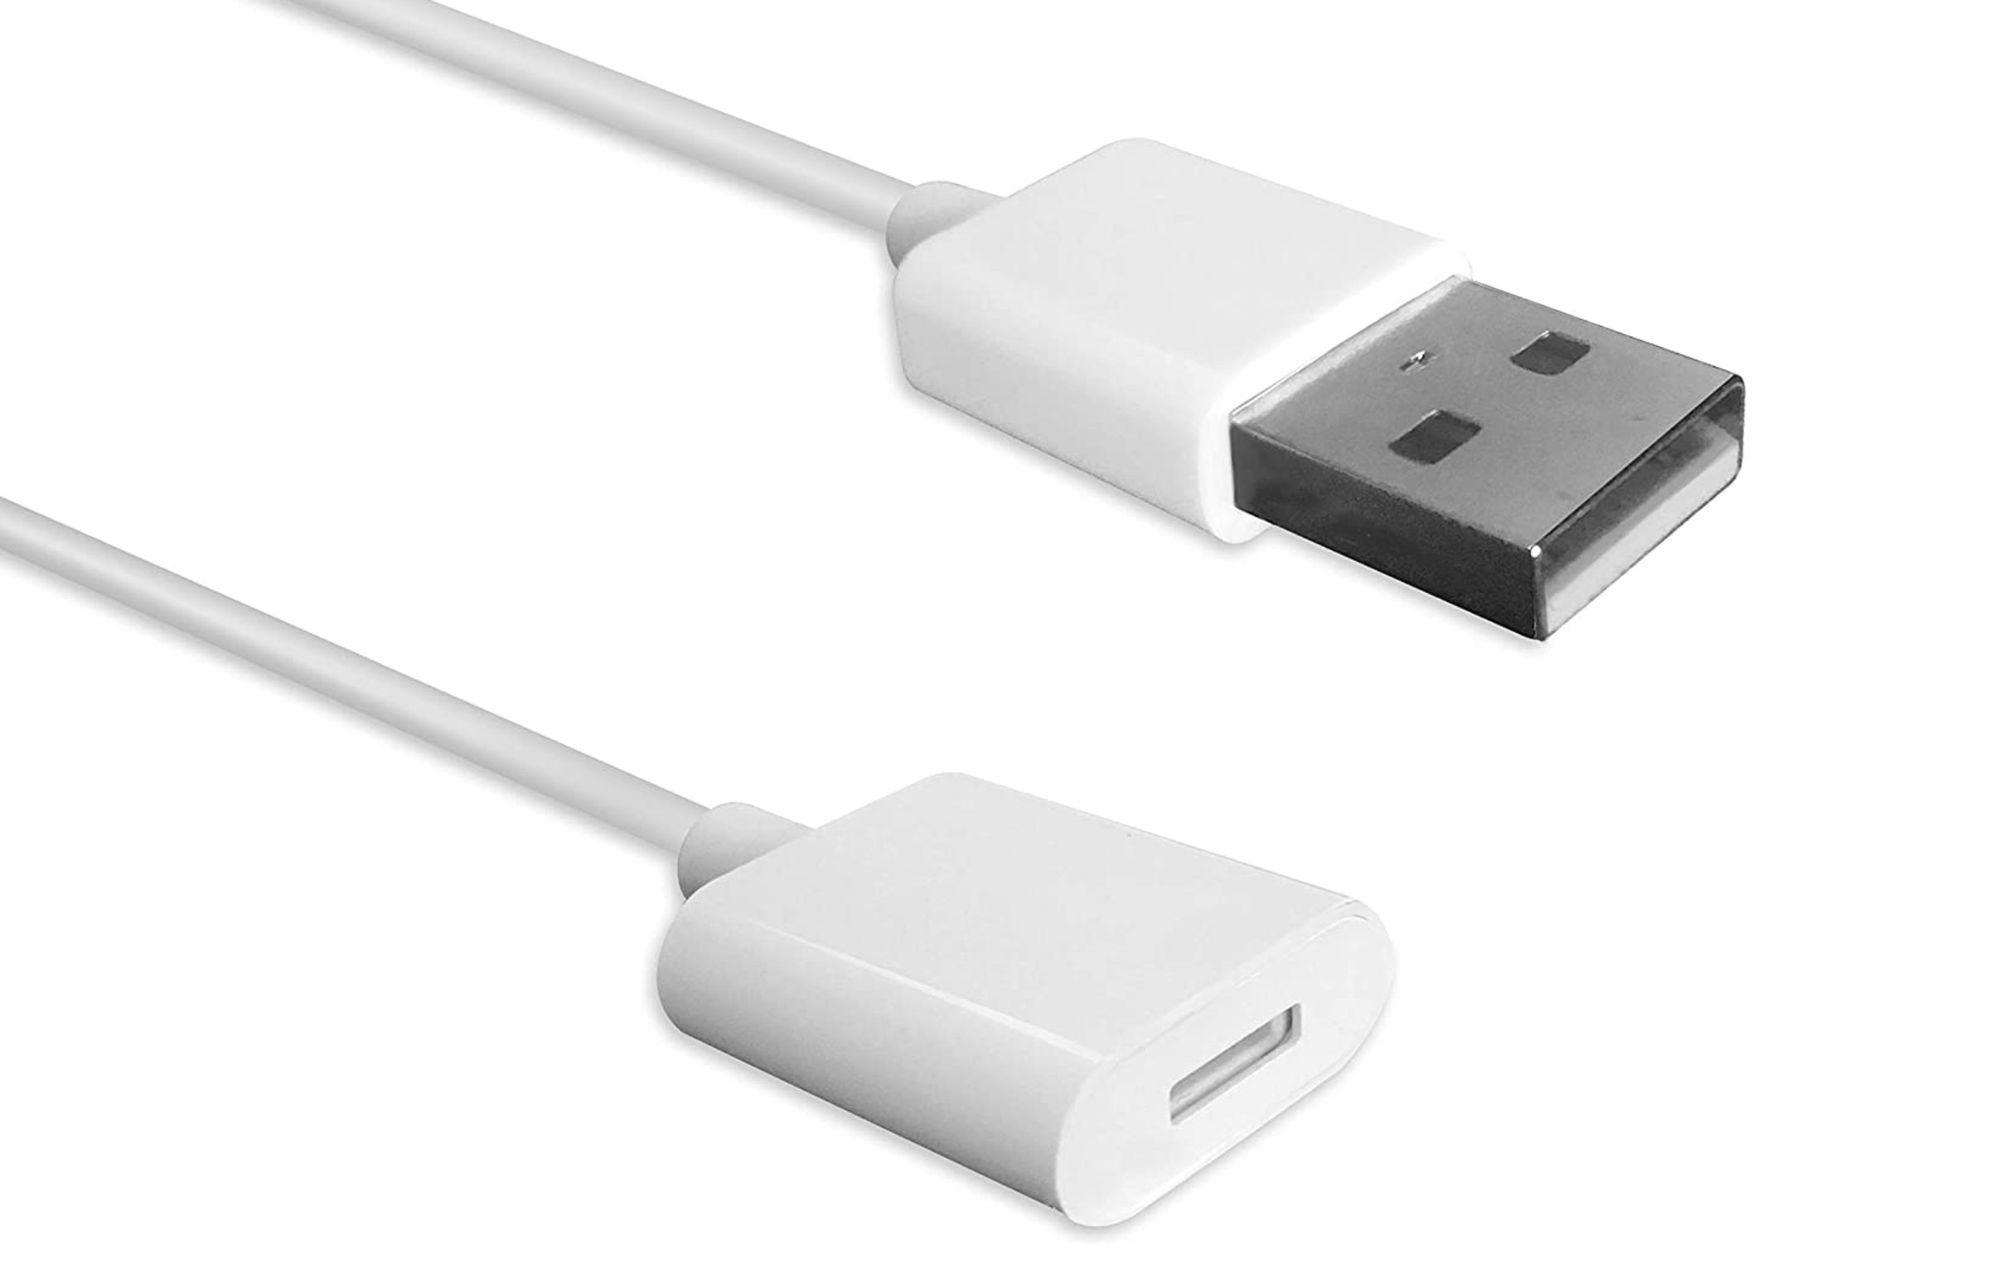 USB to Apple Pencil charging cable